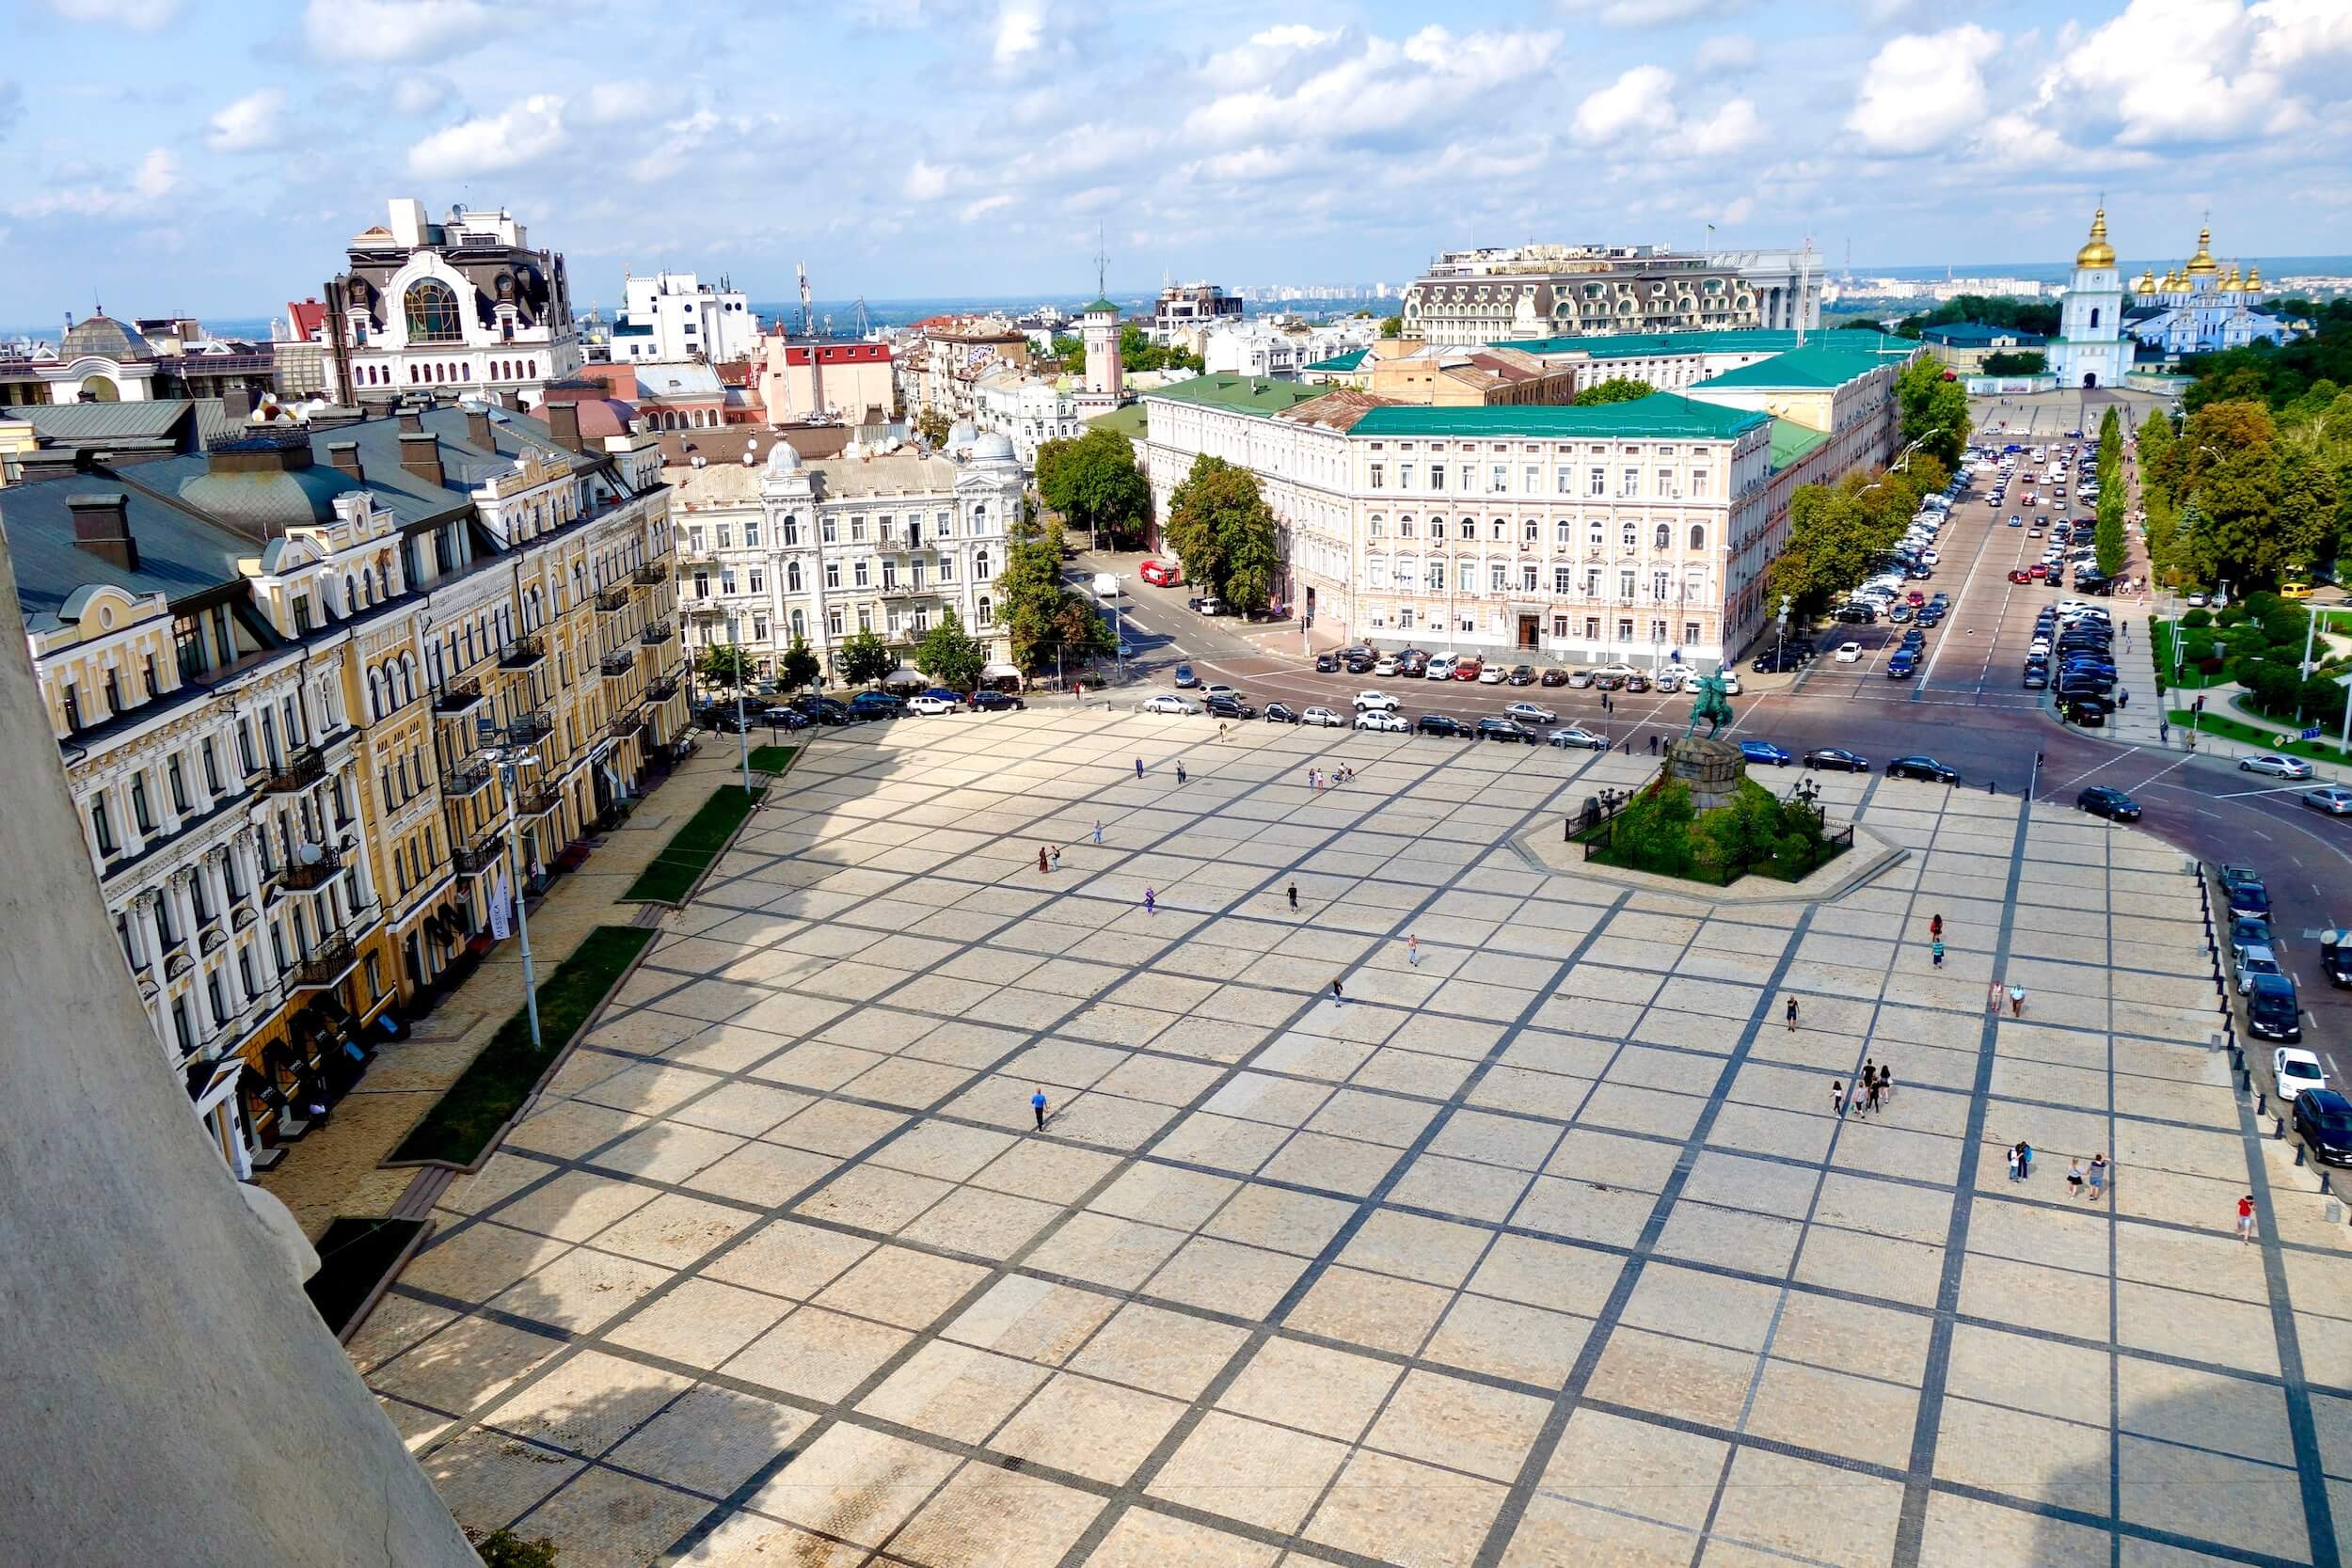 A sweeping view of the grand square in front of St. Sofia's Cathedral in Central Kiev.